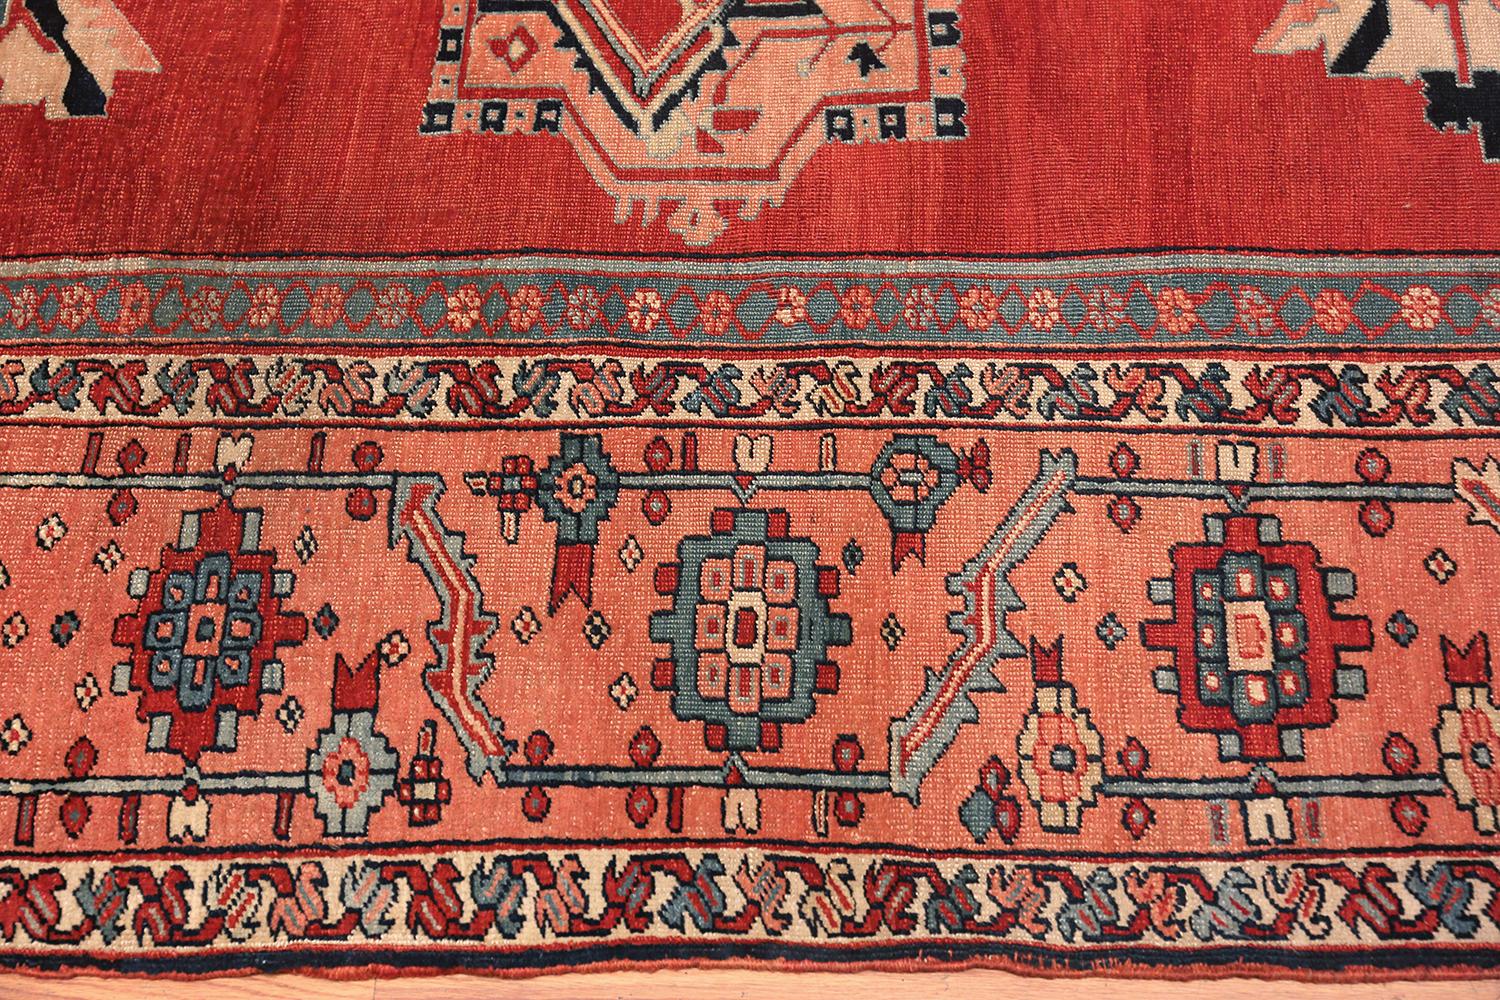 Magnificent antique Persian Serapi rug, country of origin / rug type: Persian rug, date circa 1900 - Size: 9 ft. 2 in x 13 ft. (2.79 m x 3.96 m).